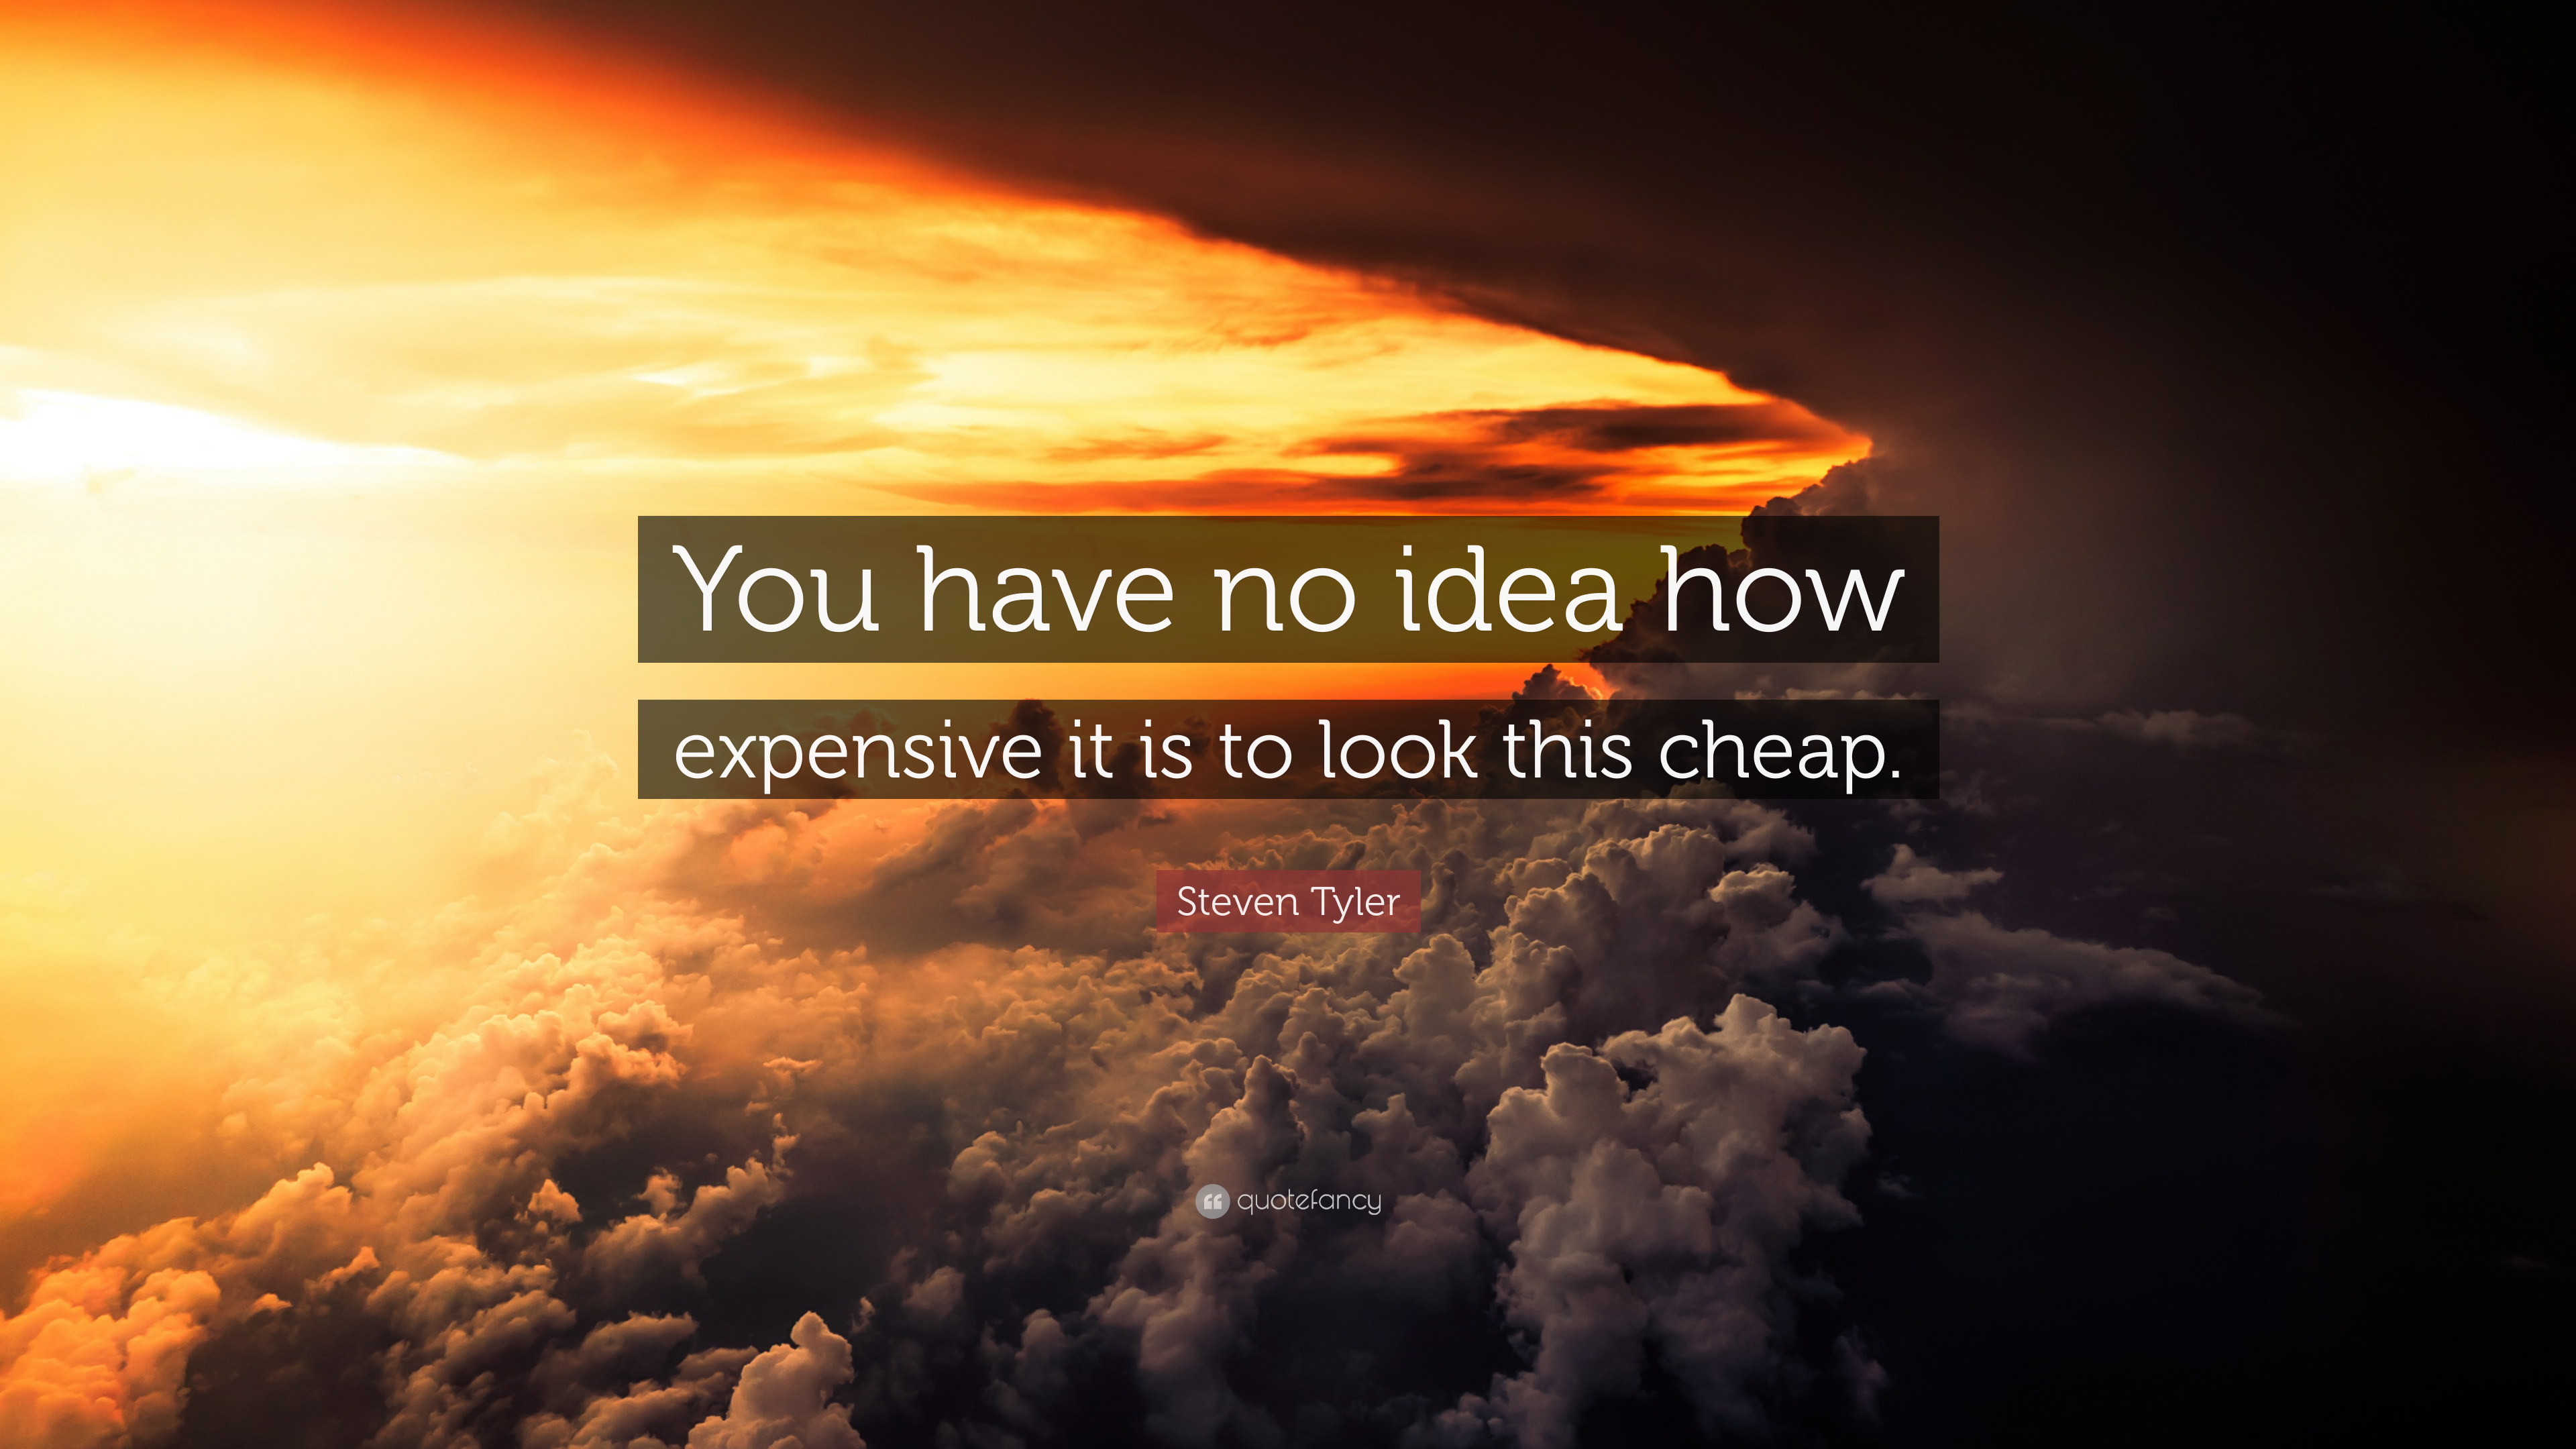 Steven Tyler Quote: “You have no idea how expensive it is to look